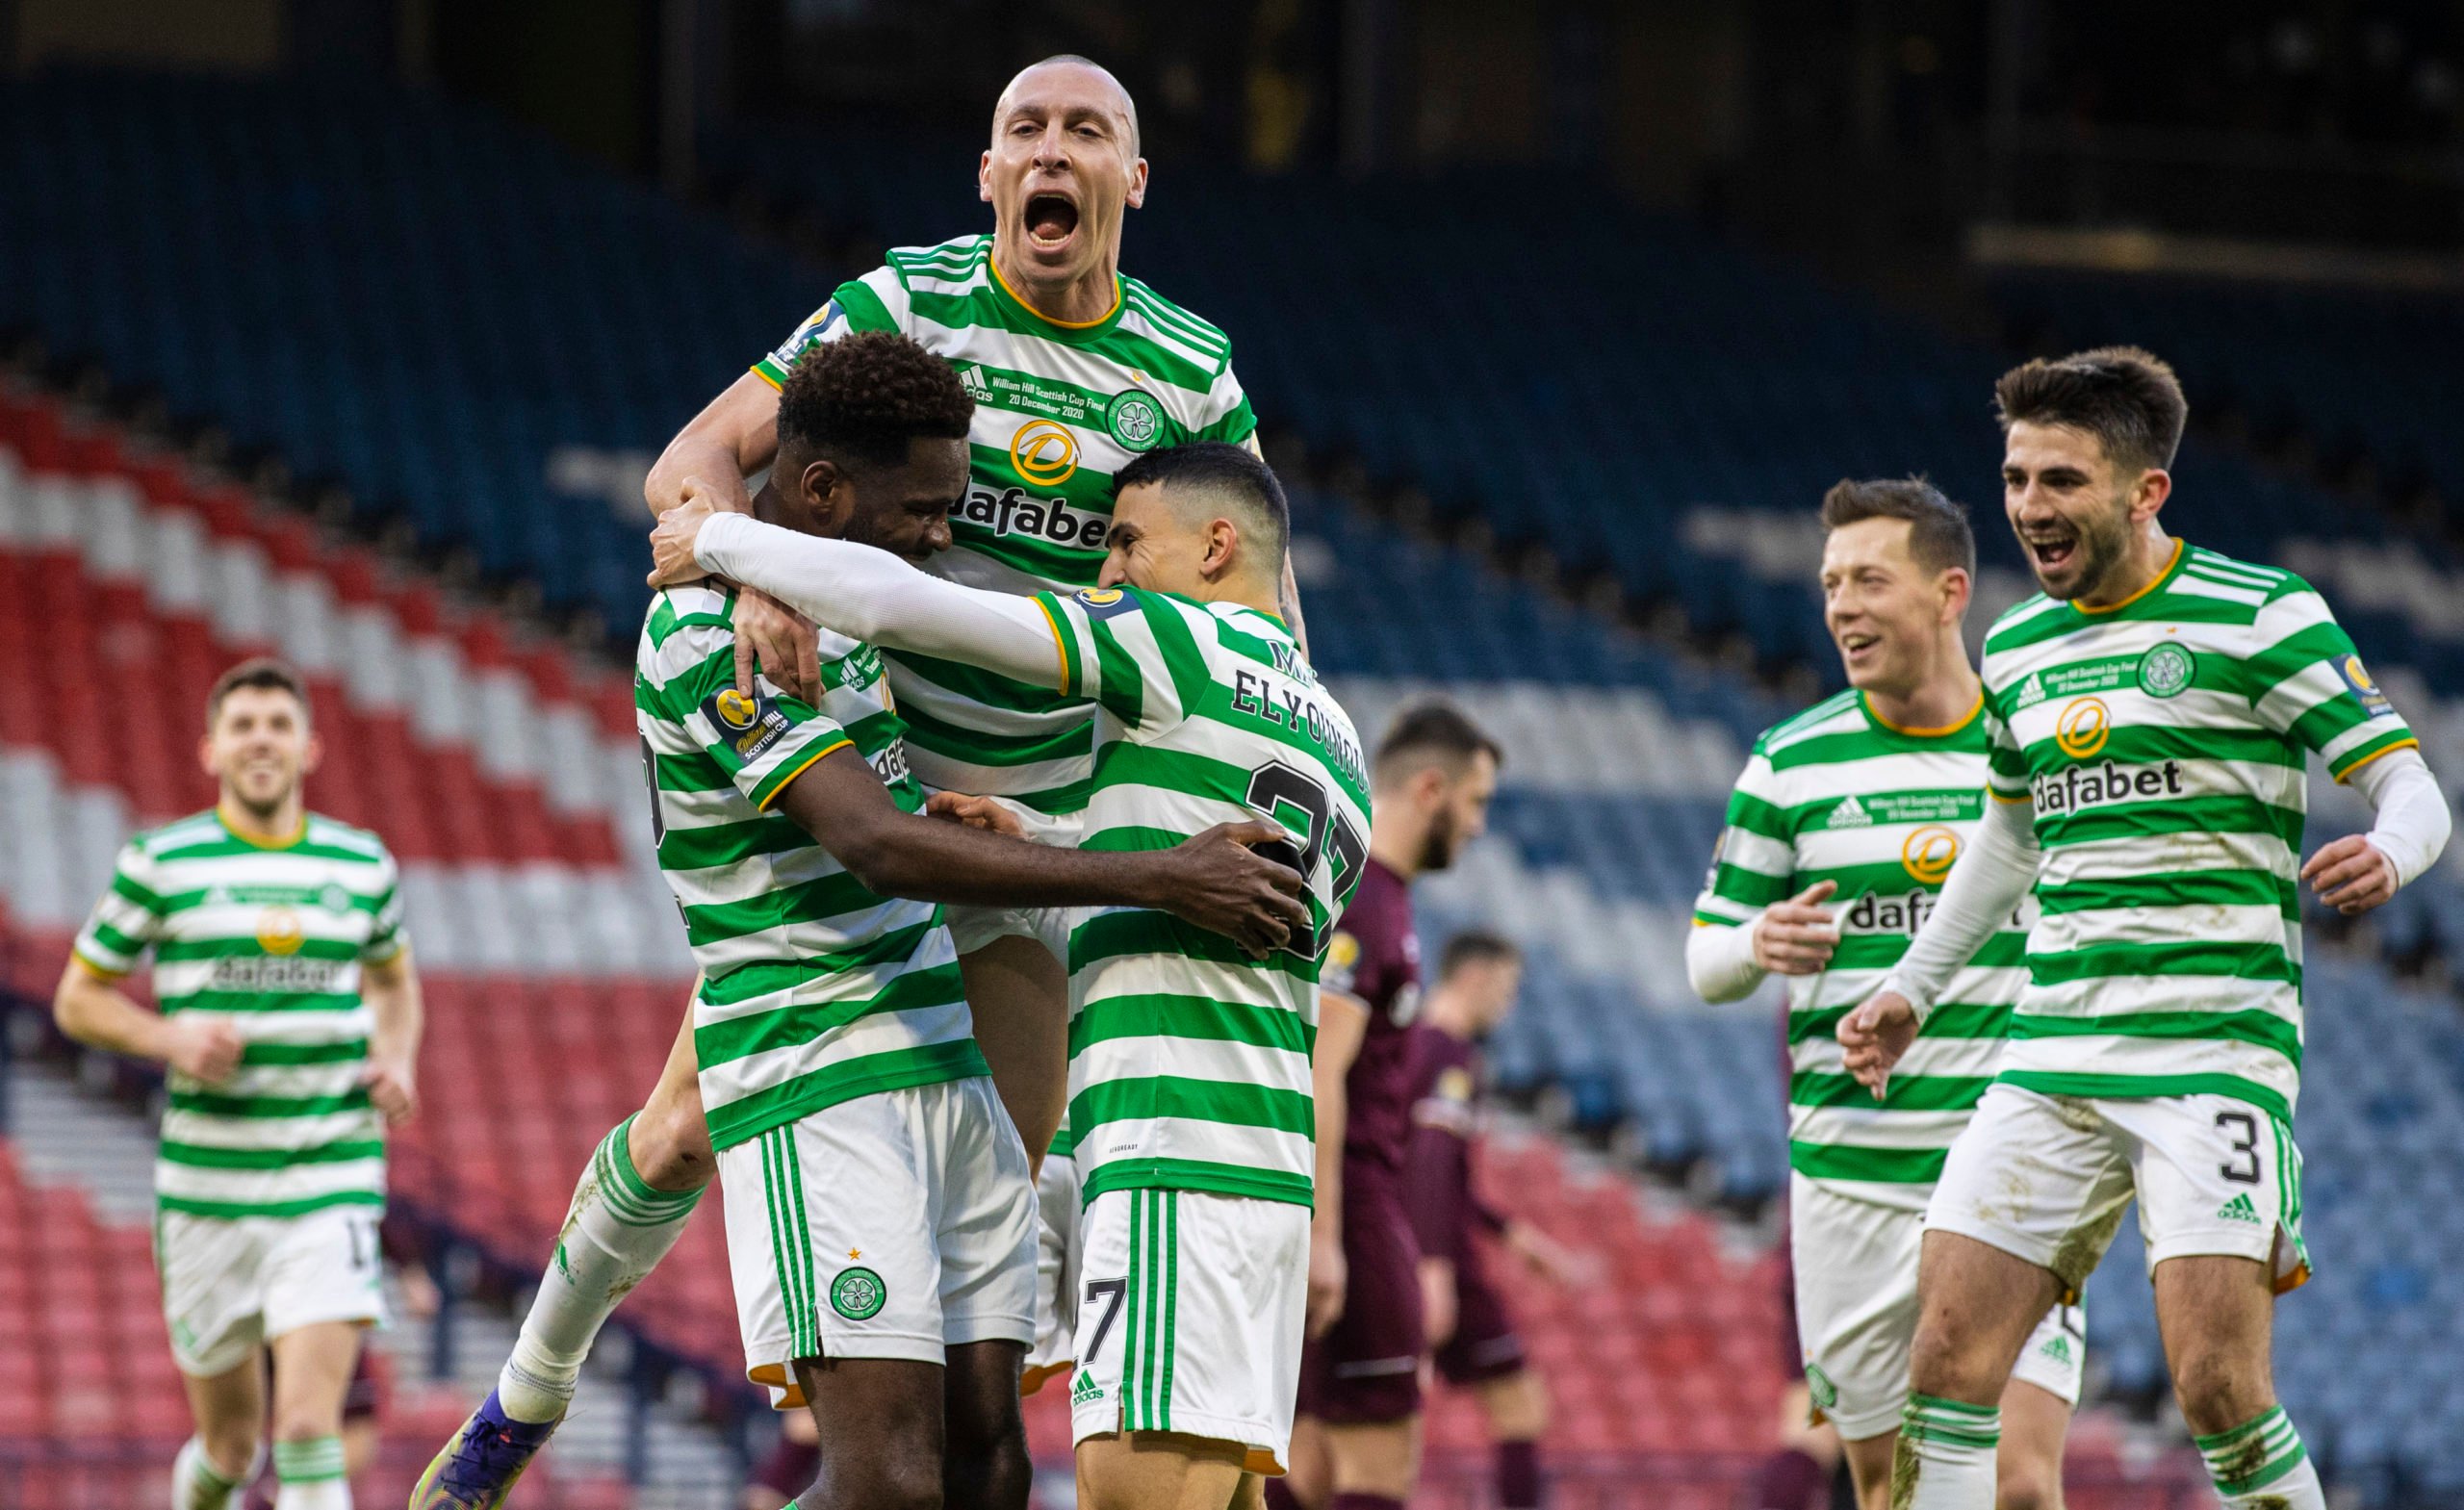 Celtic final: BBC Scotland man's bitter rant after glorious Hoops moment